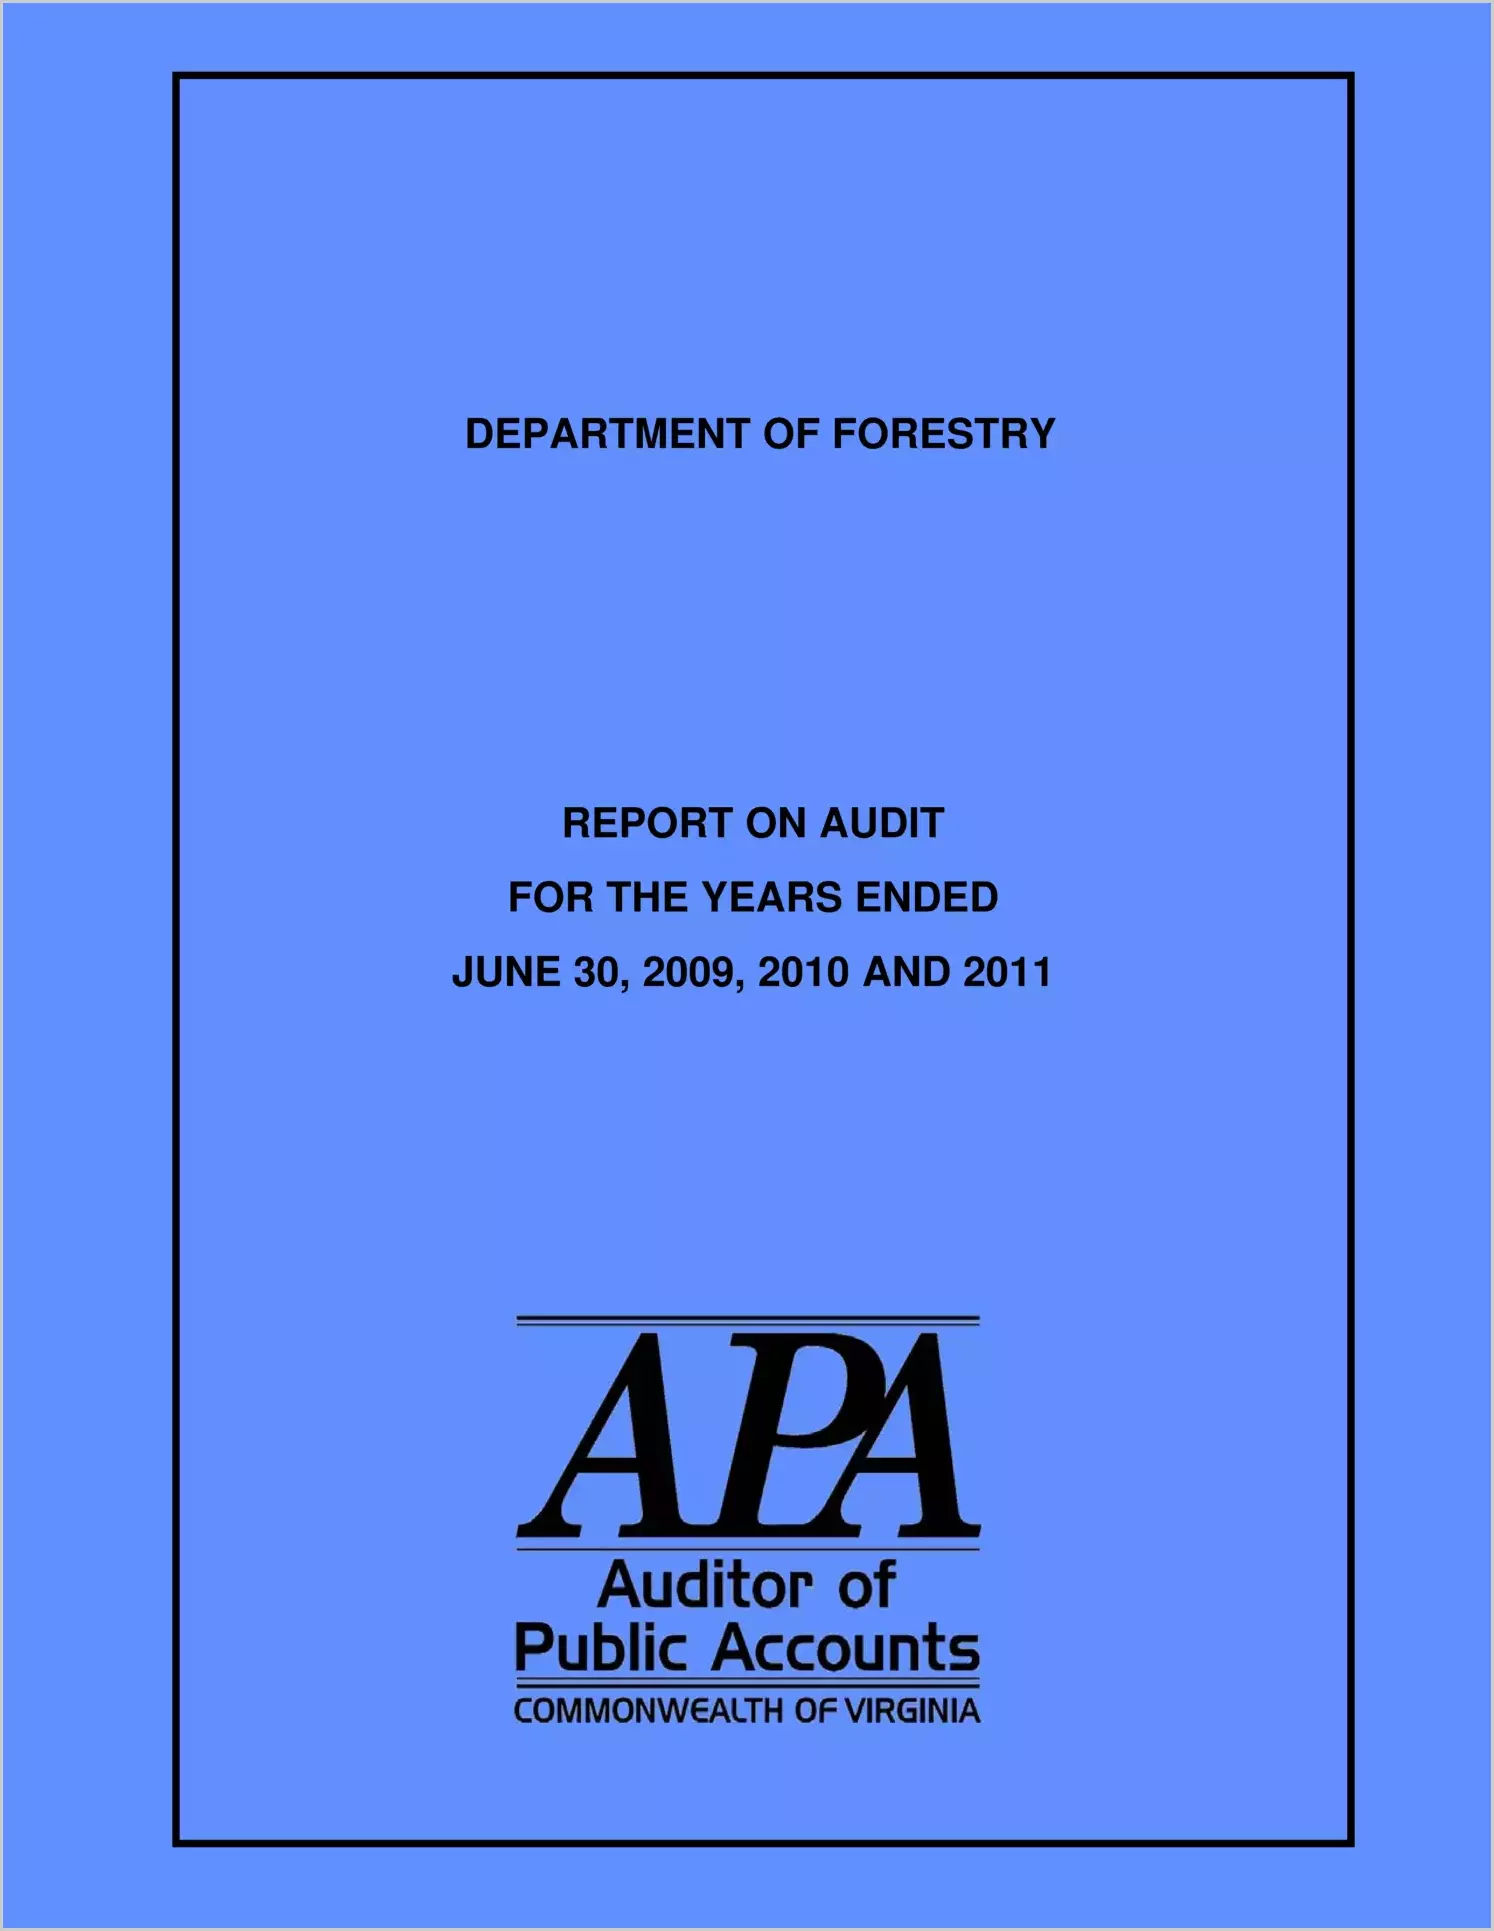 Virginia Department of Forestry for the years ended June 30, 2009, 2010 and 2011